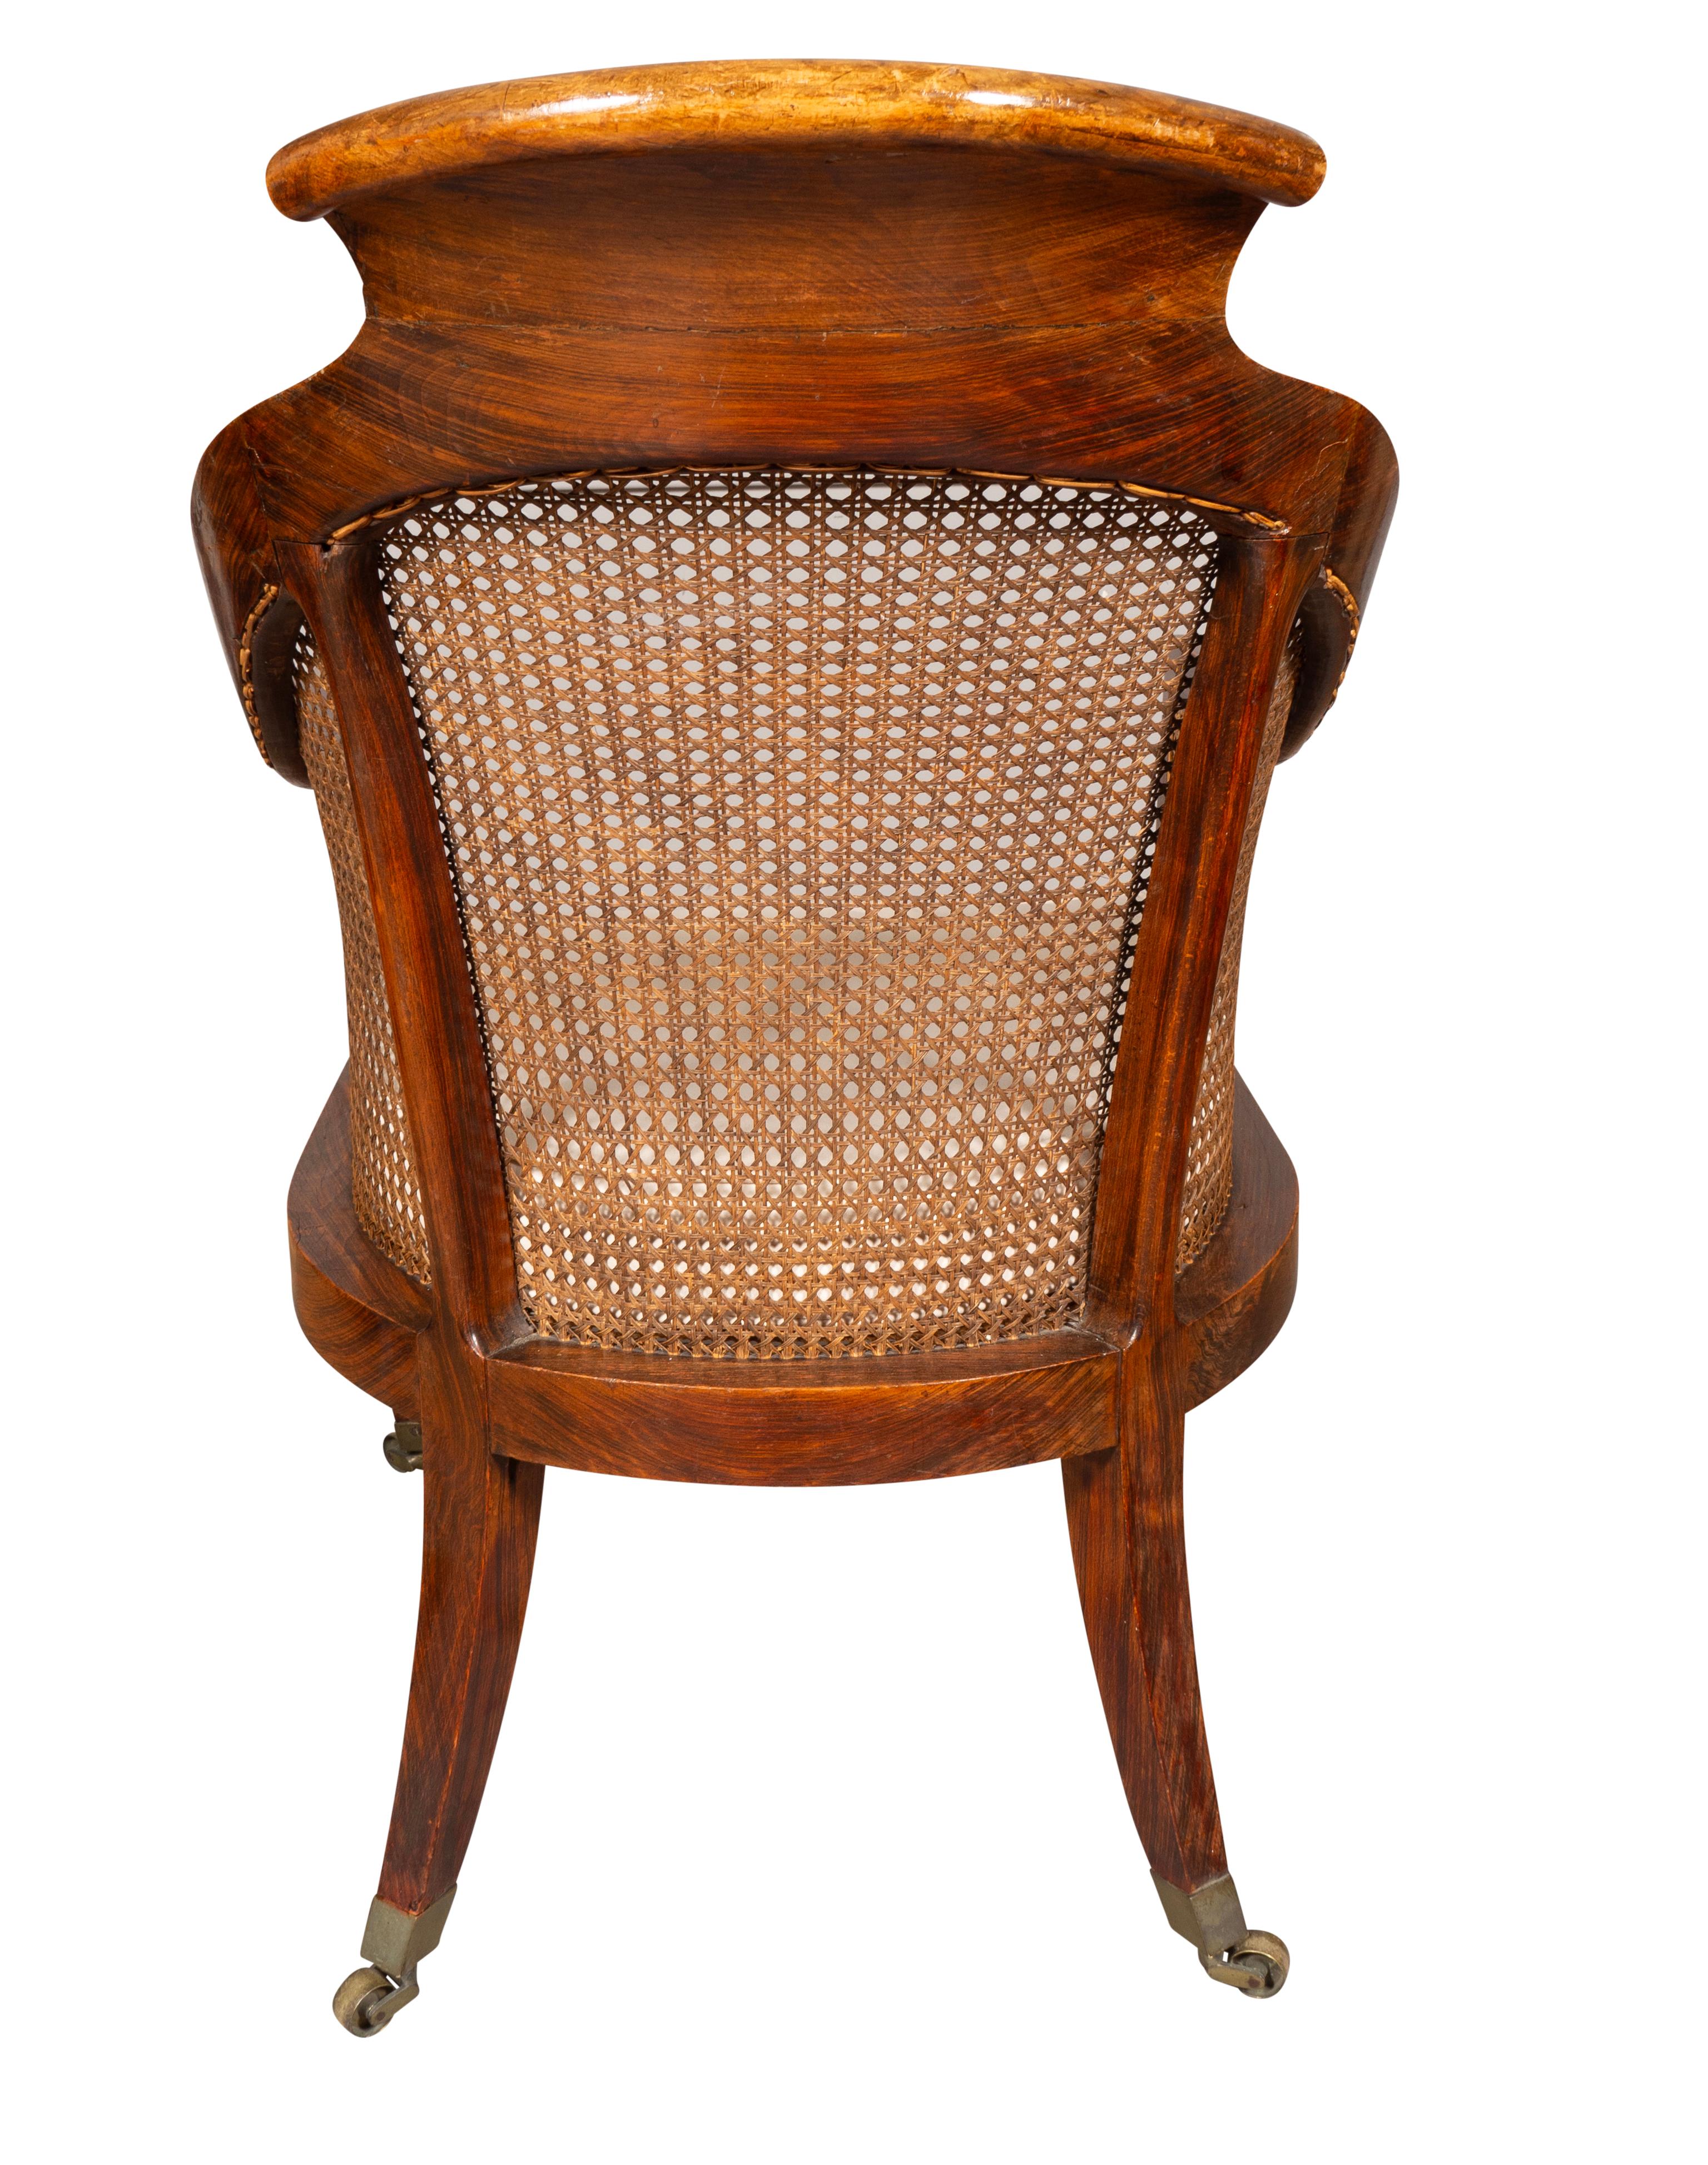 Regency Faux Rosewood Caned Tub Chair (Faux bois) im Angebot